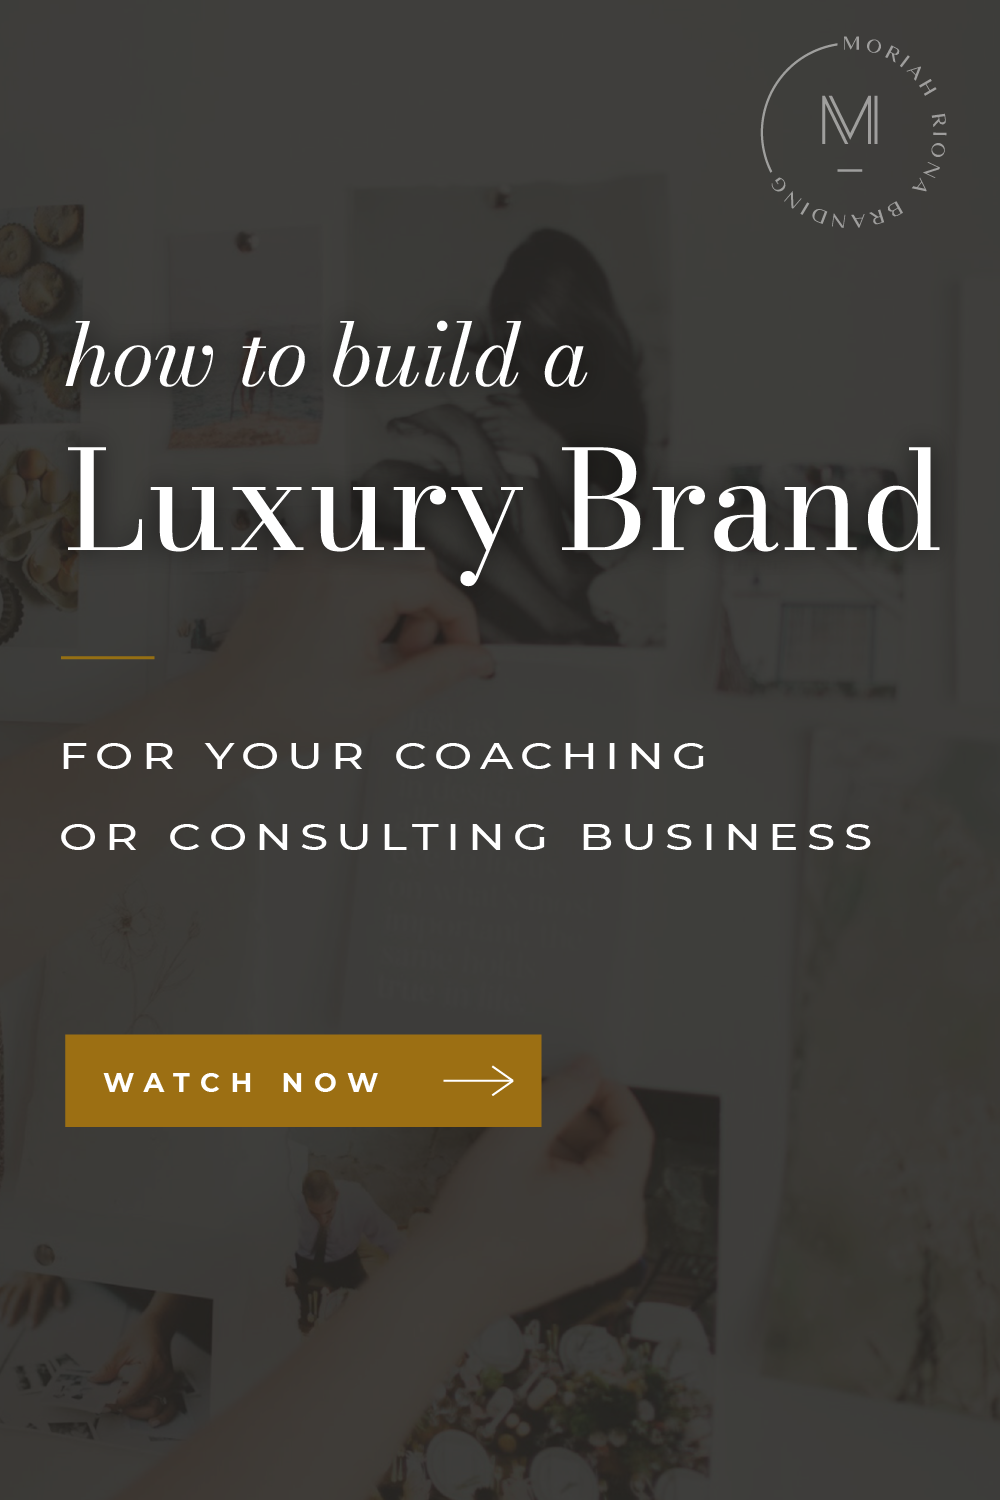 Want to learn how to elevate your coaching or consulting business? This blog post is for you! I’m sharing how to build a luxury brand—including my best tips for marketing for life coaches and consultants. Discover how high end branding is the secret to attracting higher-paying clients. #luxurybrand #branding #lifecoach #consulting